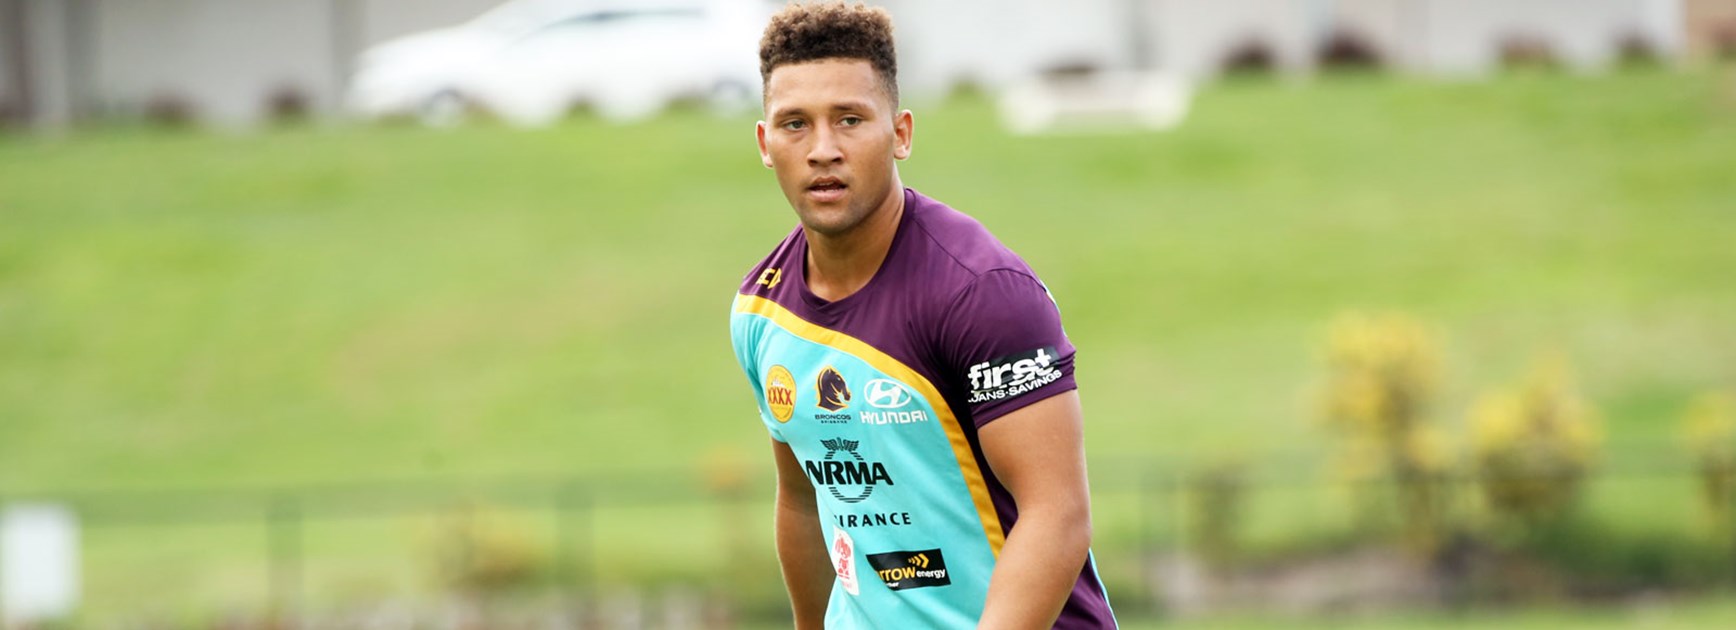 Broncos young gun Gehamat Shibasaki could push for a spot in the NRL side in 2017.